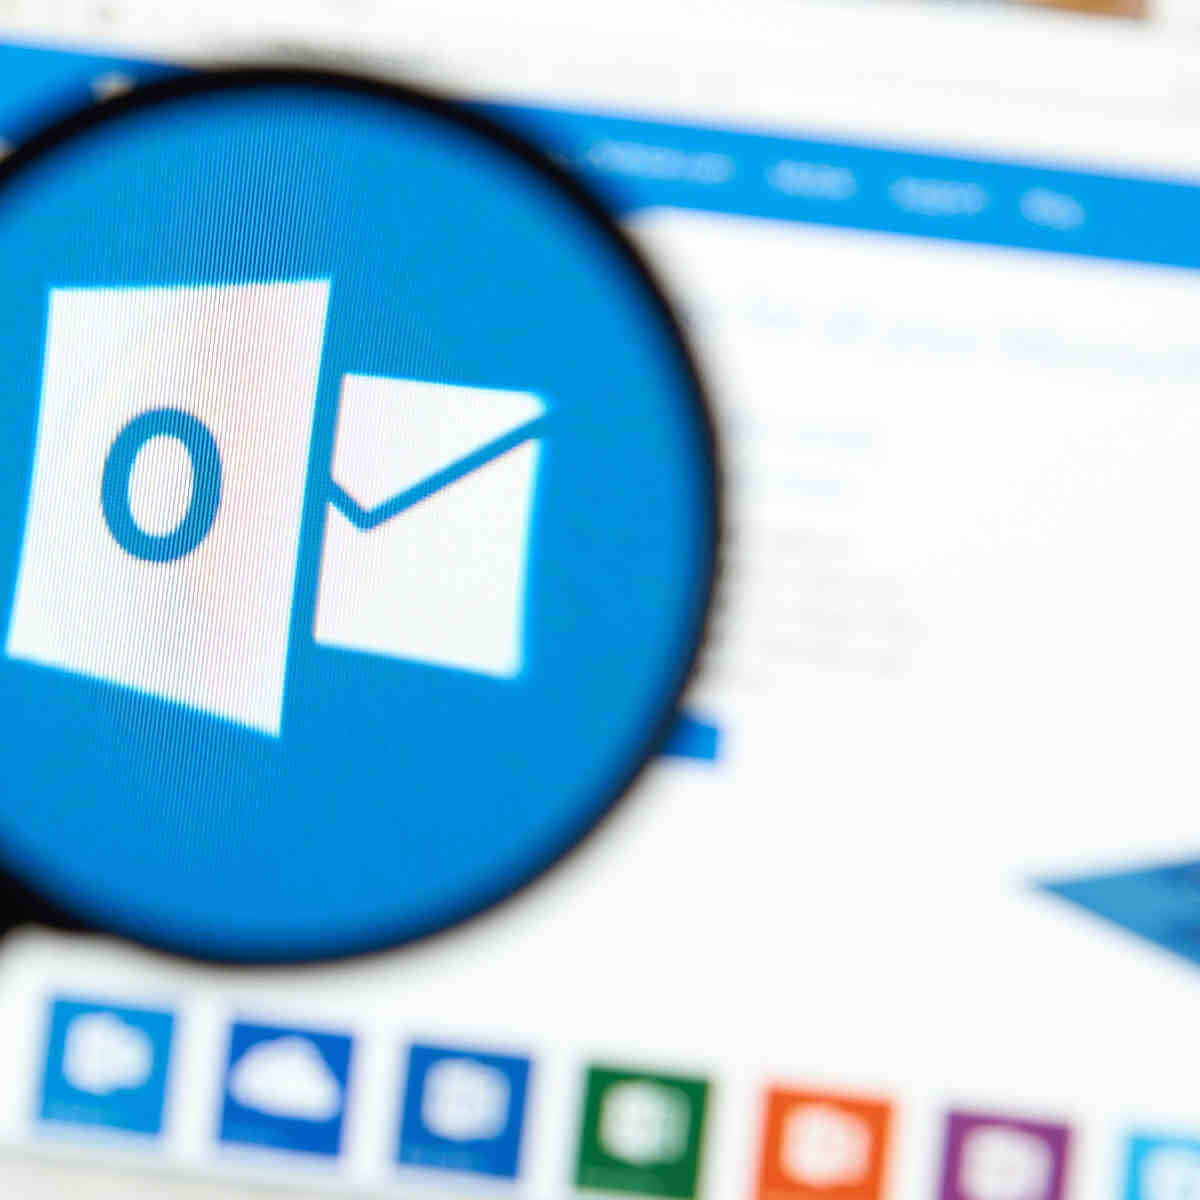 Microsoft Outlook gets a pre-installed polling tool